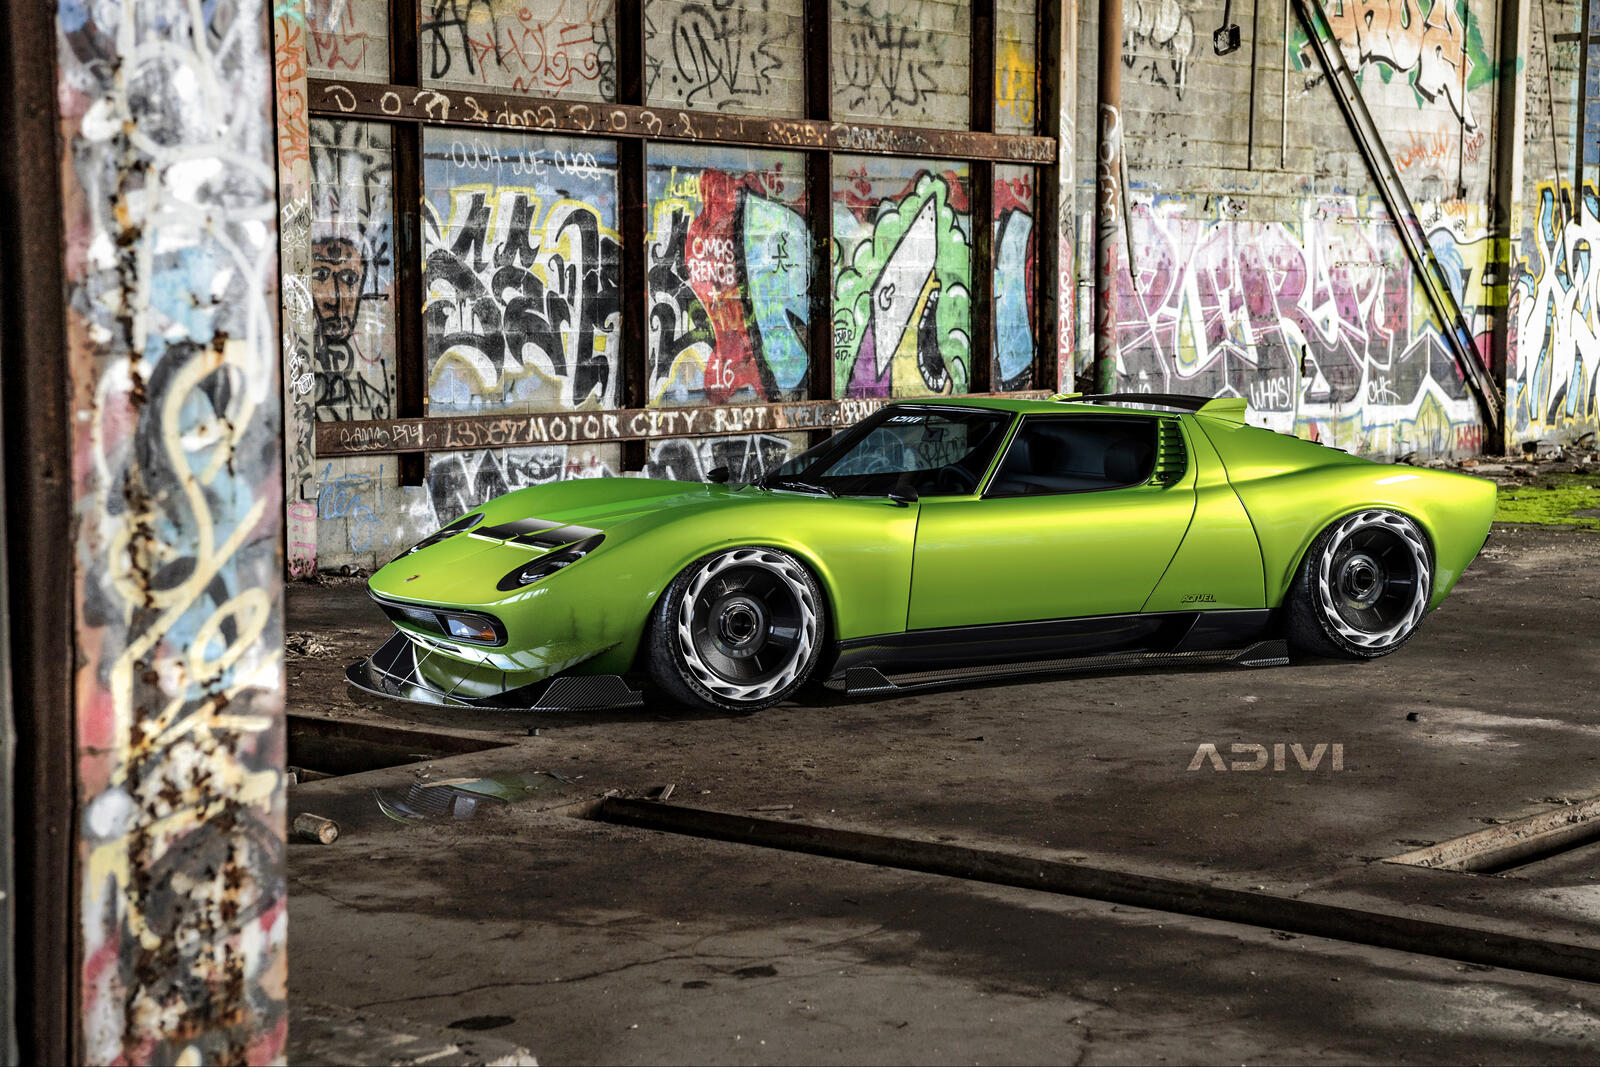 Free photo A saloon-colored Lamborghini Miura stands in a hangar with painted walls